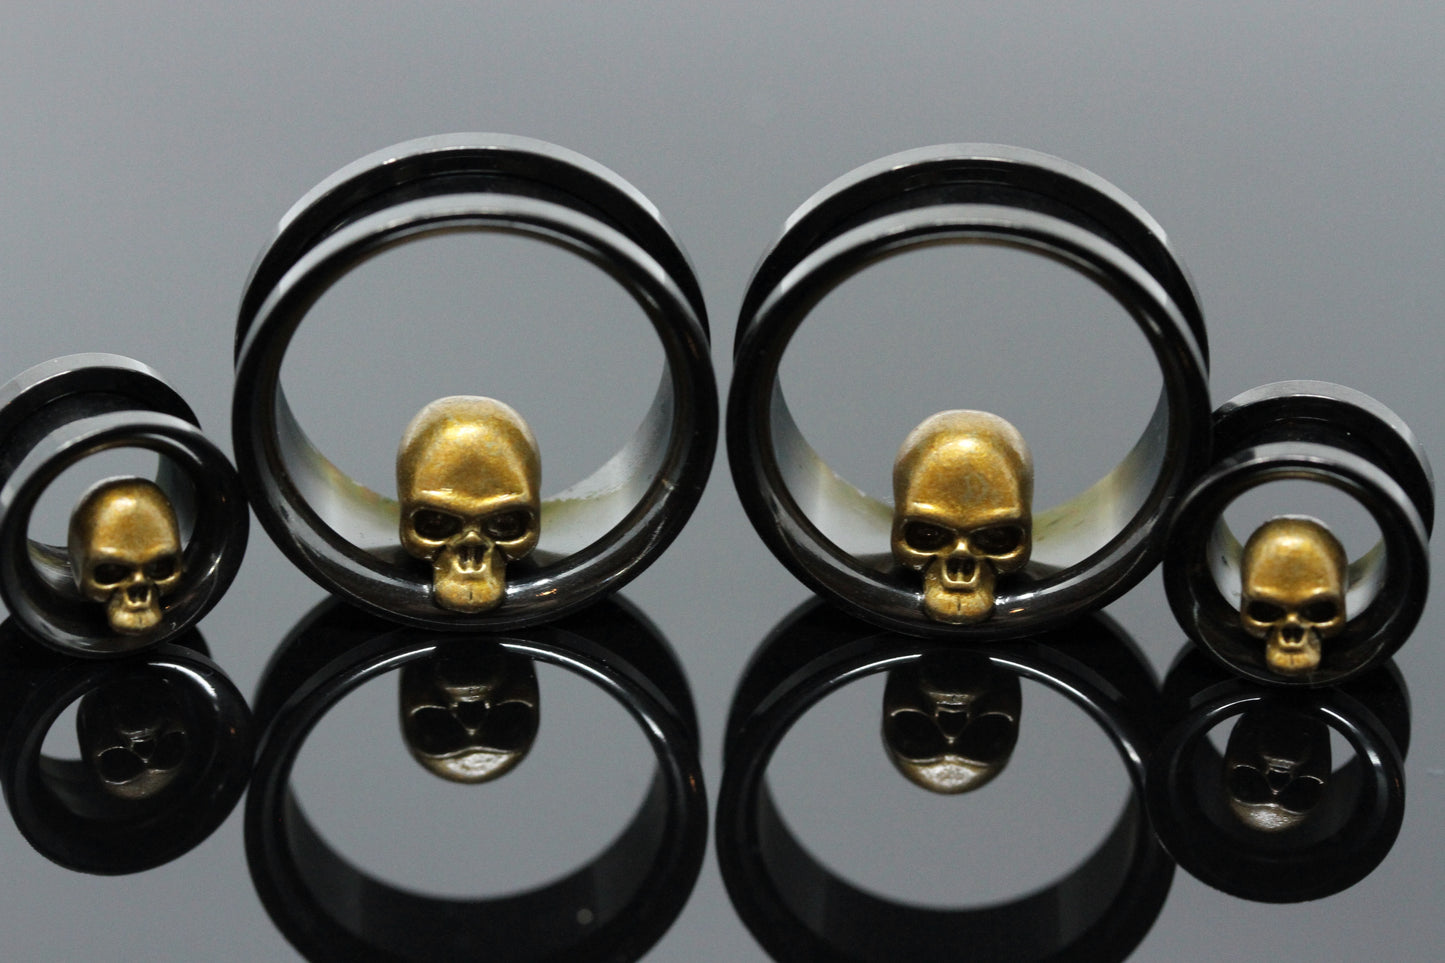 Gold Skull Stainless Steel Tunnels - Screw on Tunnel (Pair) - PSS68